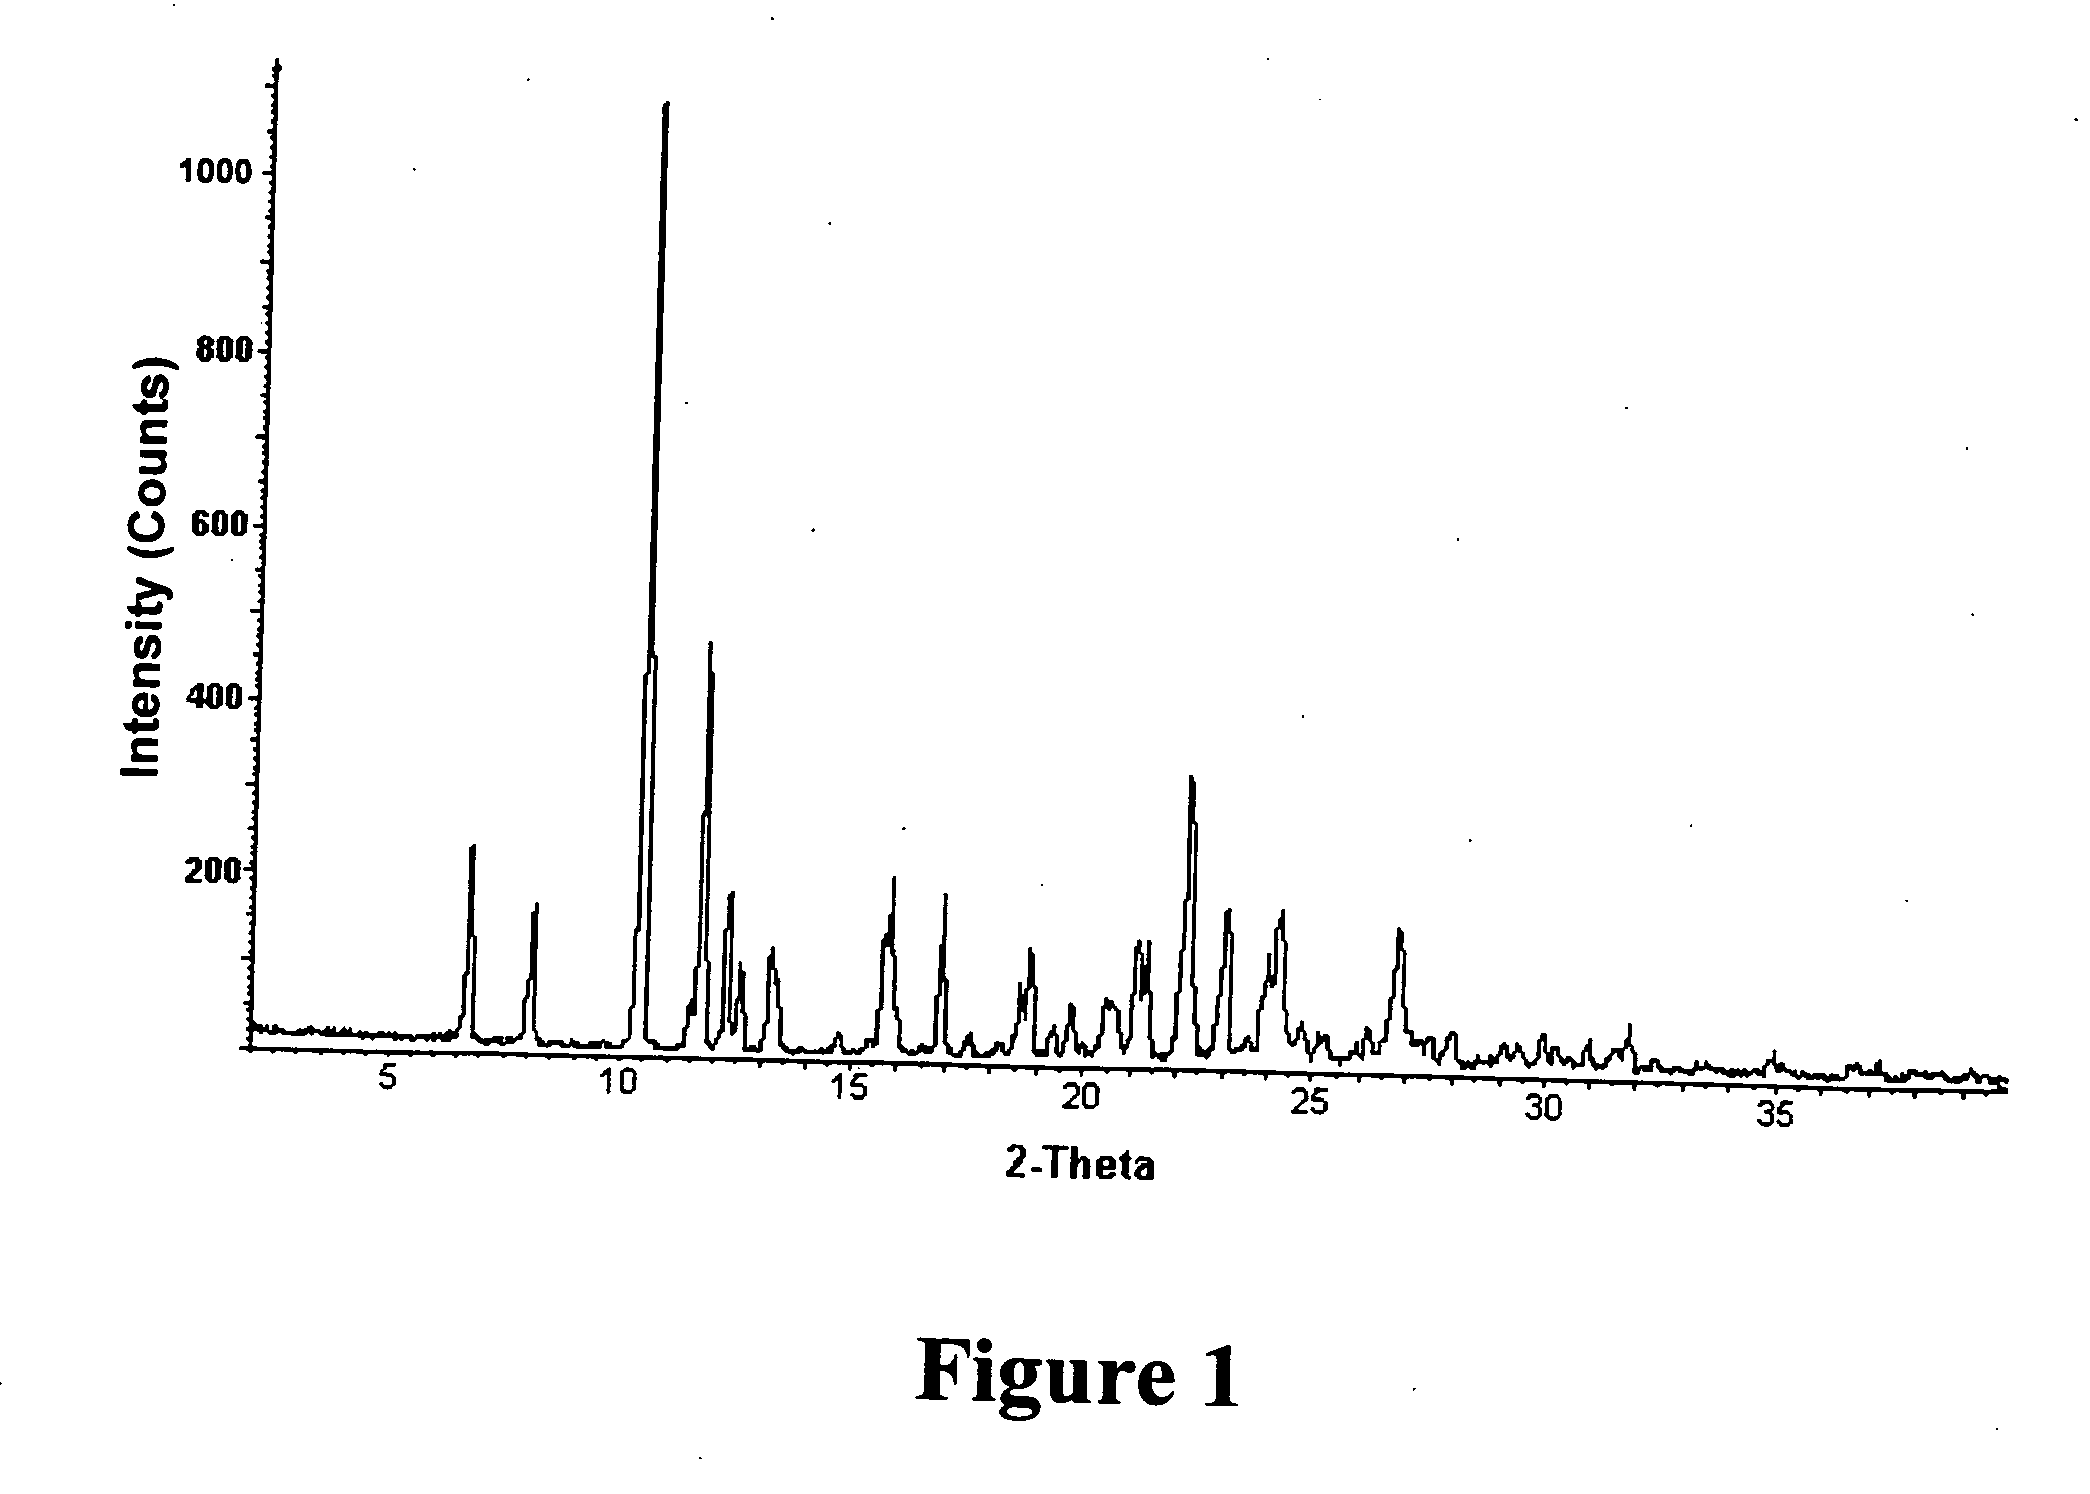 Salt and crystalline form thereof of a corticotropin releasing factor receptor antagonist